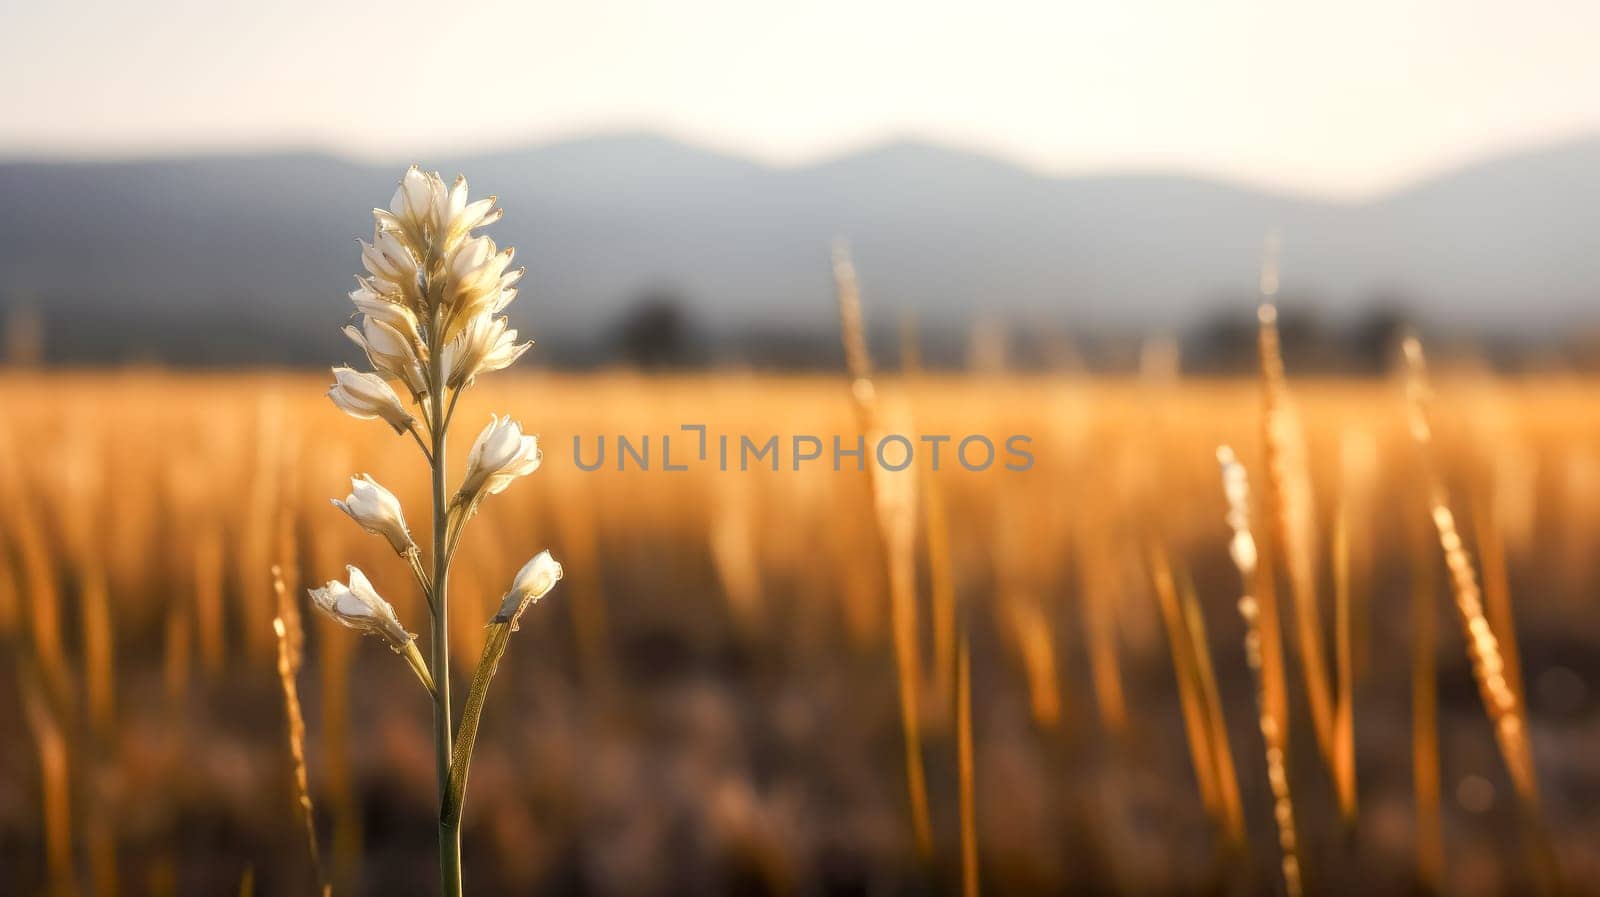 A single white flower is standing in a field of yellow flowers. The sun is setting in the background, casting a warm glow over the scene. Concept of peace and tranquility